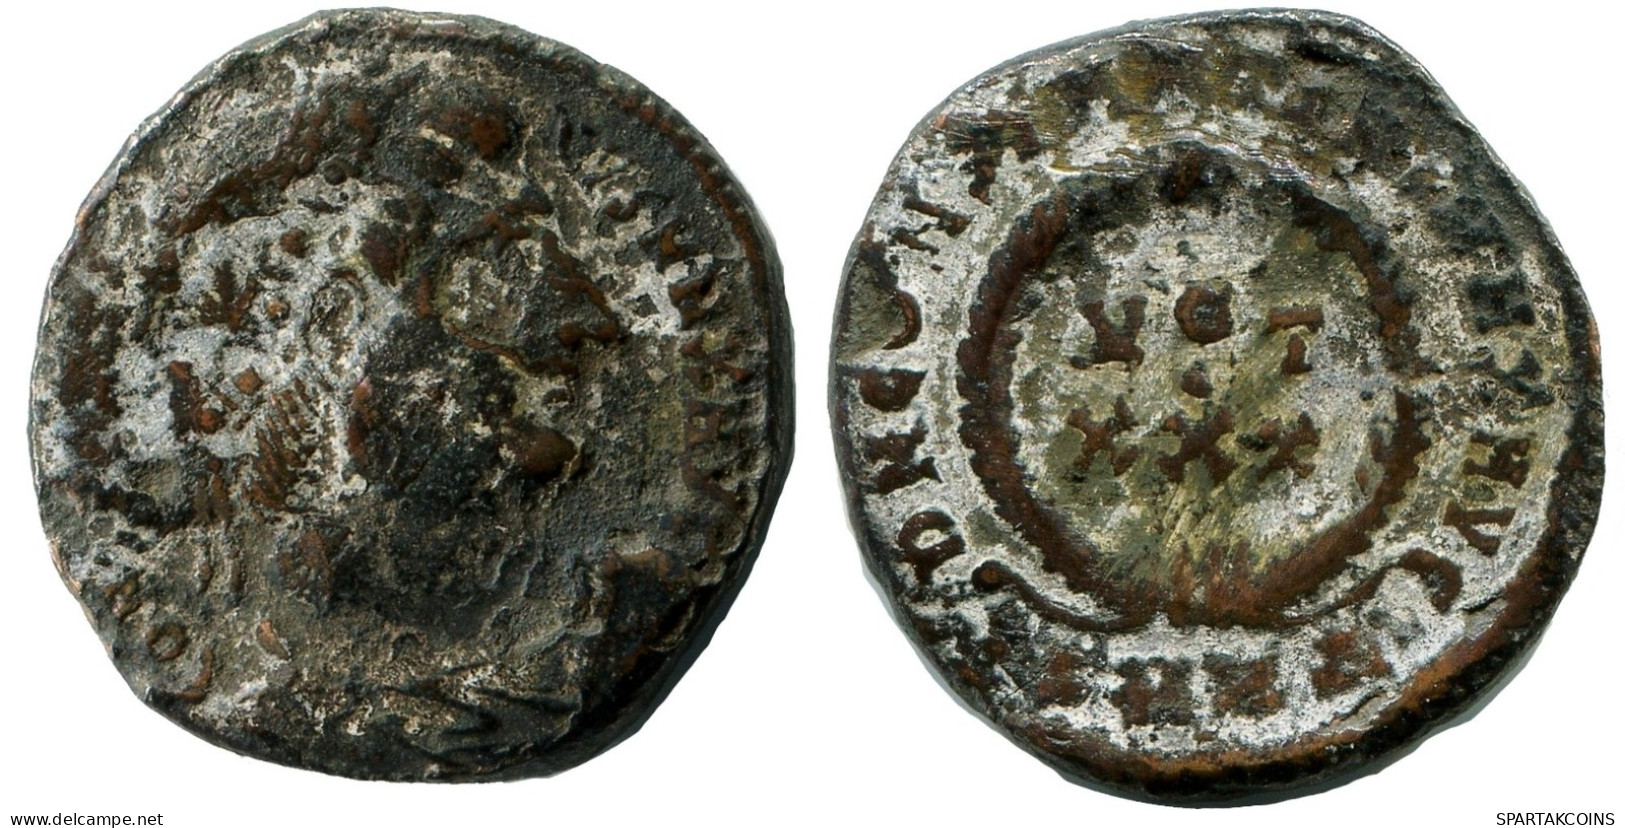 CONSTANTINE I MINTED IN HERACLEA FOUND IN IHNASYAH HOARD EGYPT #ANC11210.14.F.A - El Imperio Christiano (307 / 363)